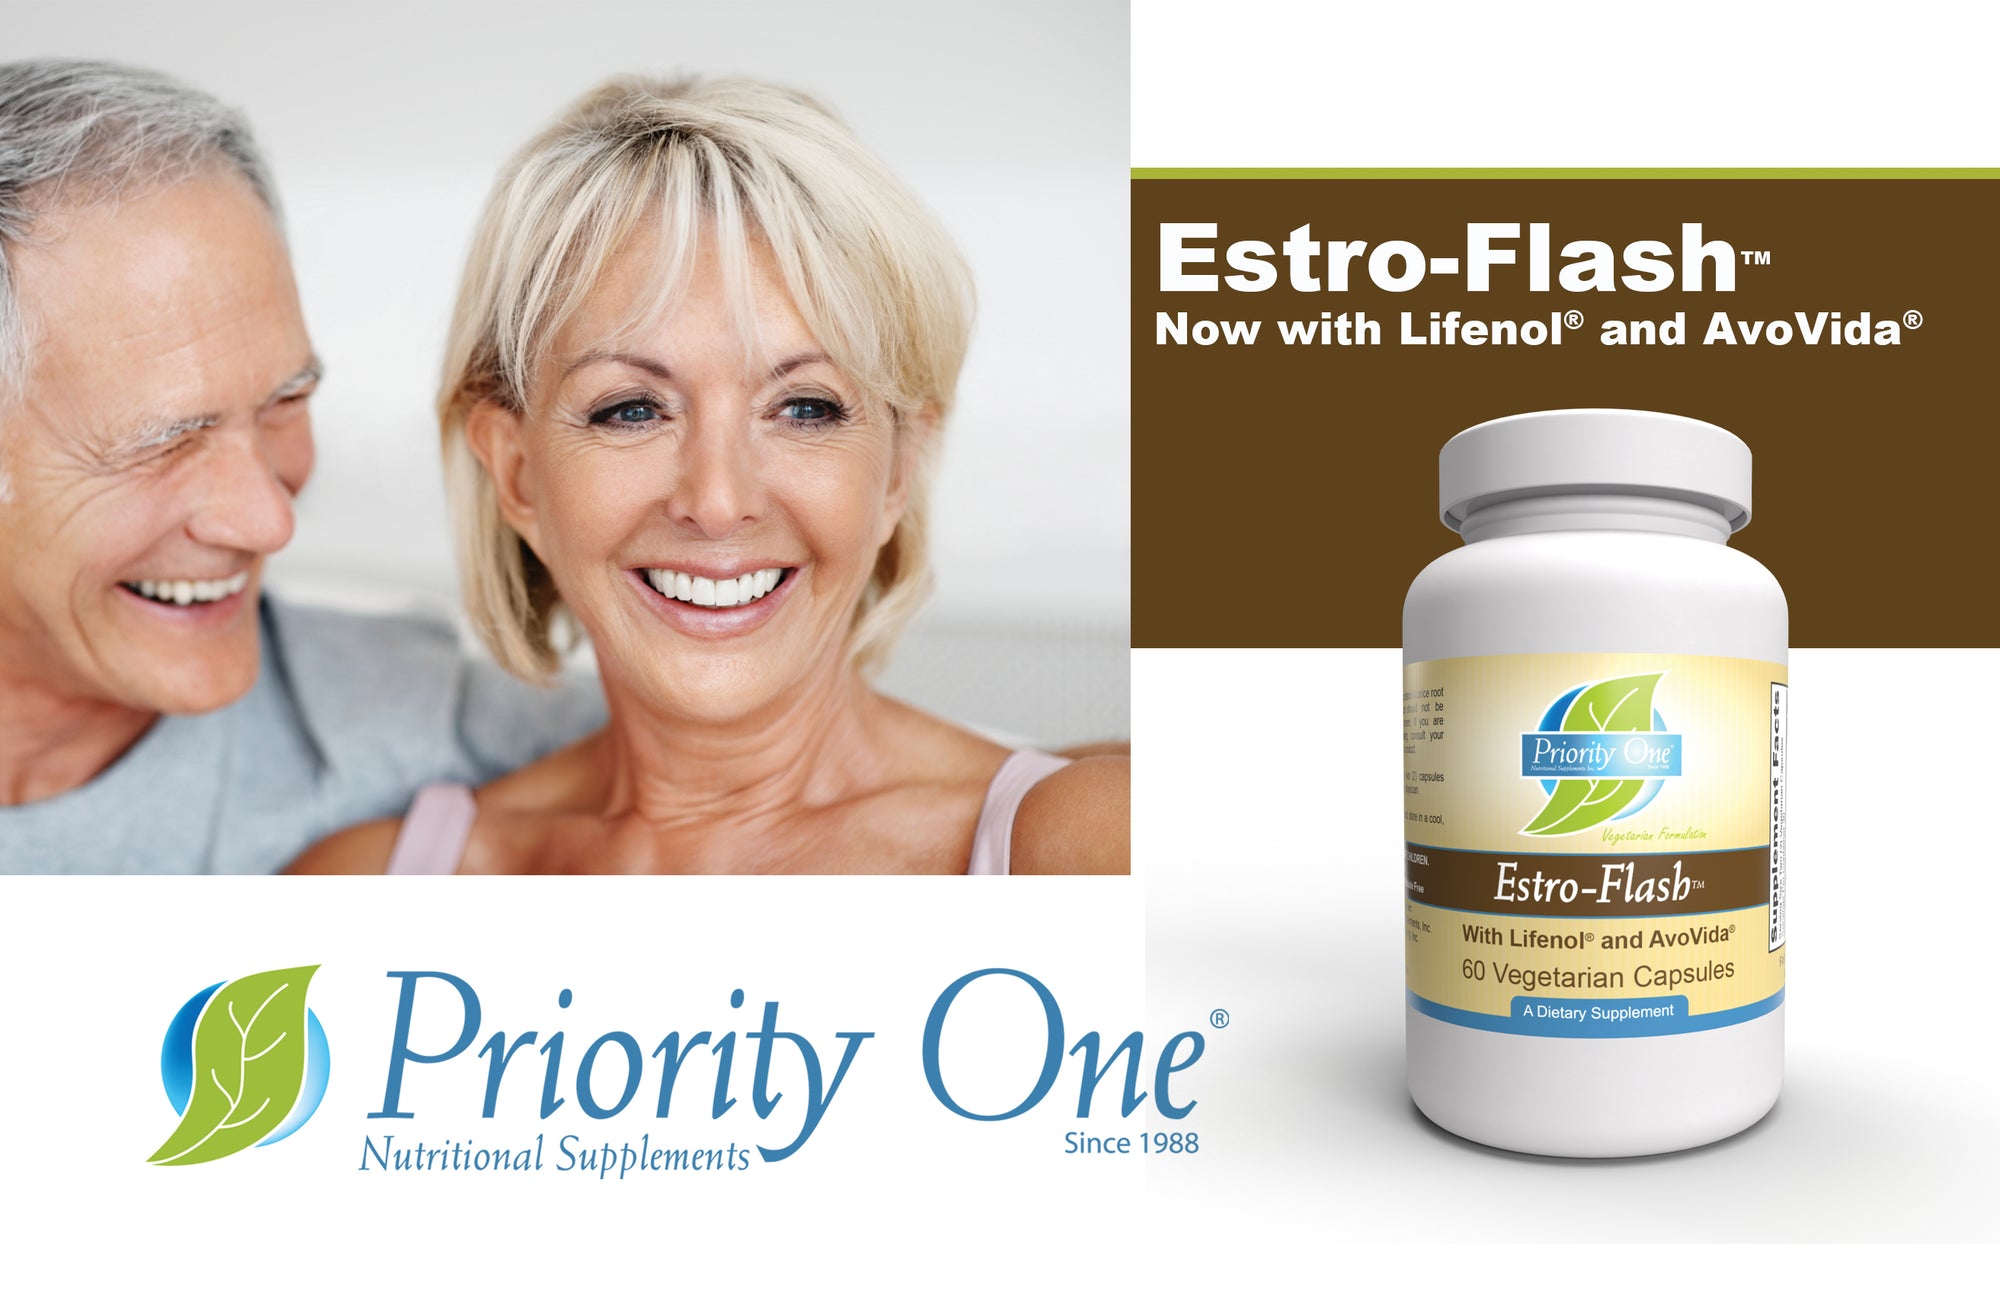 Estro-Flash is a powerful blend of herbal extracts designed to support a healthy female endocrine system, and assist the body's ability to achieve hormone balance.*